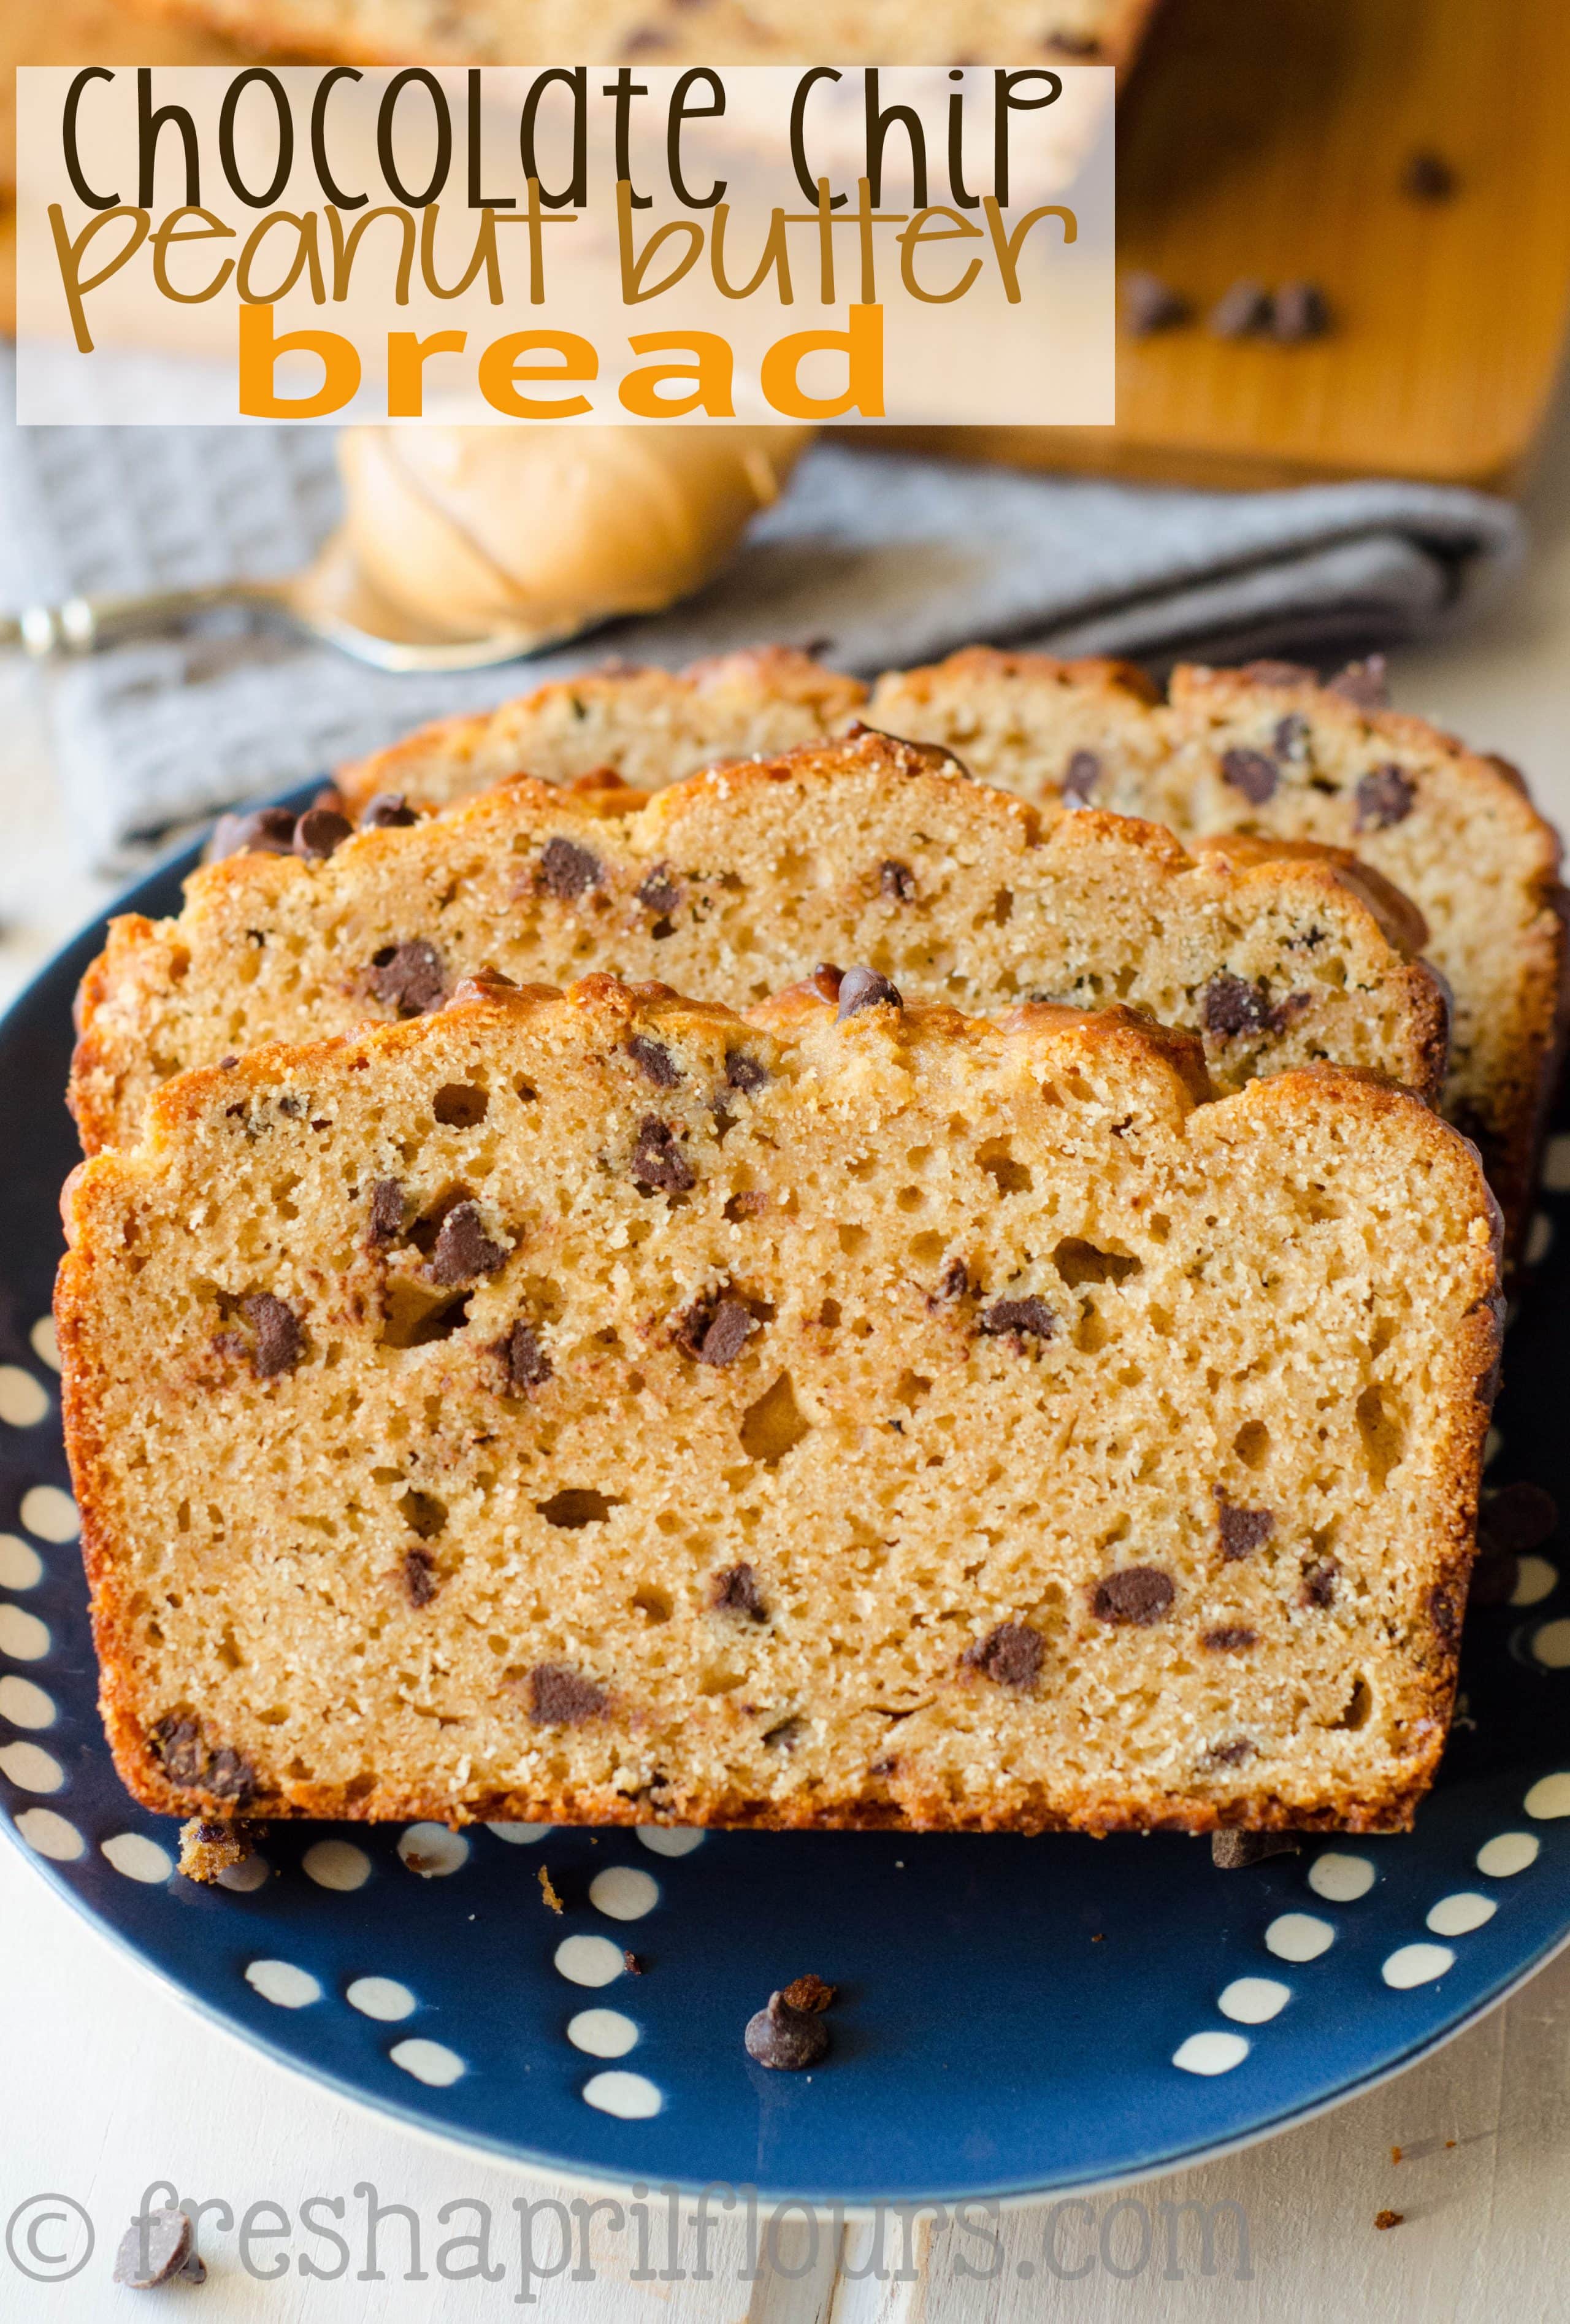 A crunchy exterior gives way to a moist and flavorful quick bread loaded with peanut butter and dotted with chocolate chips. via @frshaprilflours